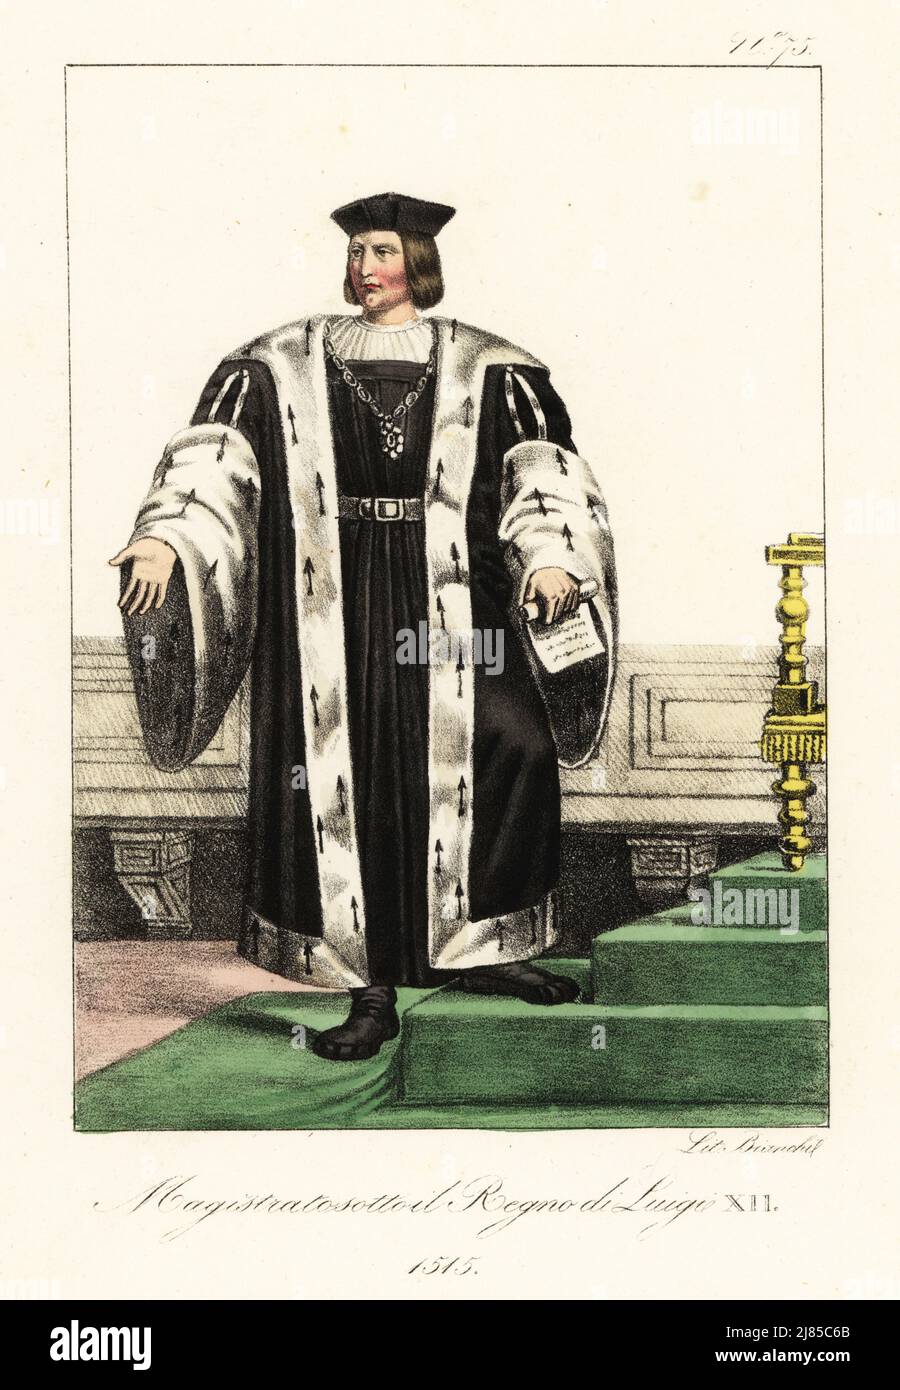 French magistrate in the reign of King Louis XII, 1515. In cap, velvet mantle with full sleeves, ermine trim, black robe, silver chain. Magistrat sous le Regne de Louis XII. Handcoloured lithograph by Lorenzo Bianchi after Hippolyte Lecomte from Costumi civili e militari della monarchia francese dal 1200 al 1820, Naples, 1825. Italian edition of Lecomte’s Civilian and military costumes of the French monarchy from 1200 to 1820. Stock Photo